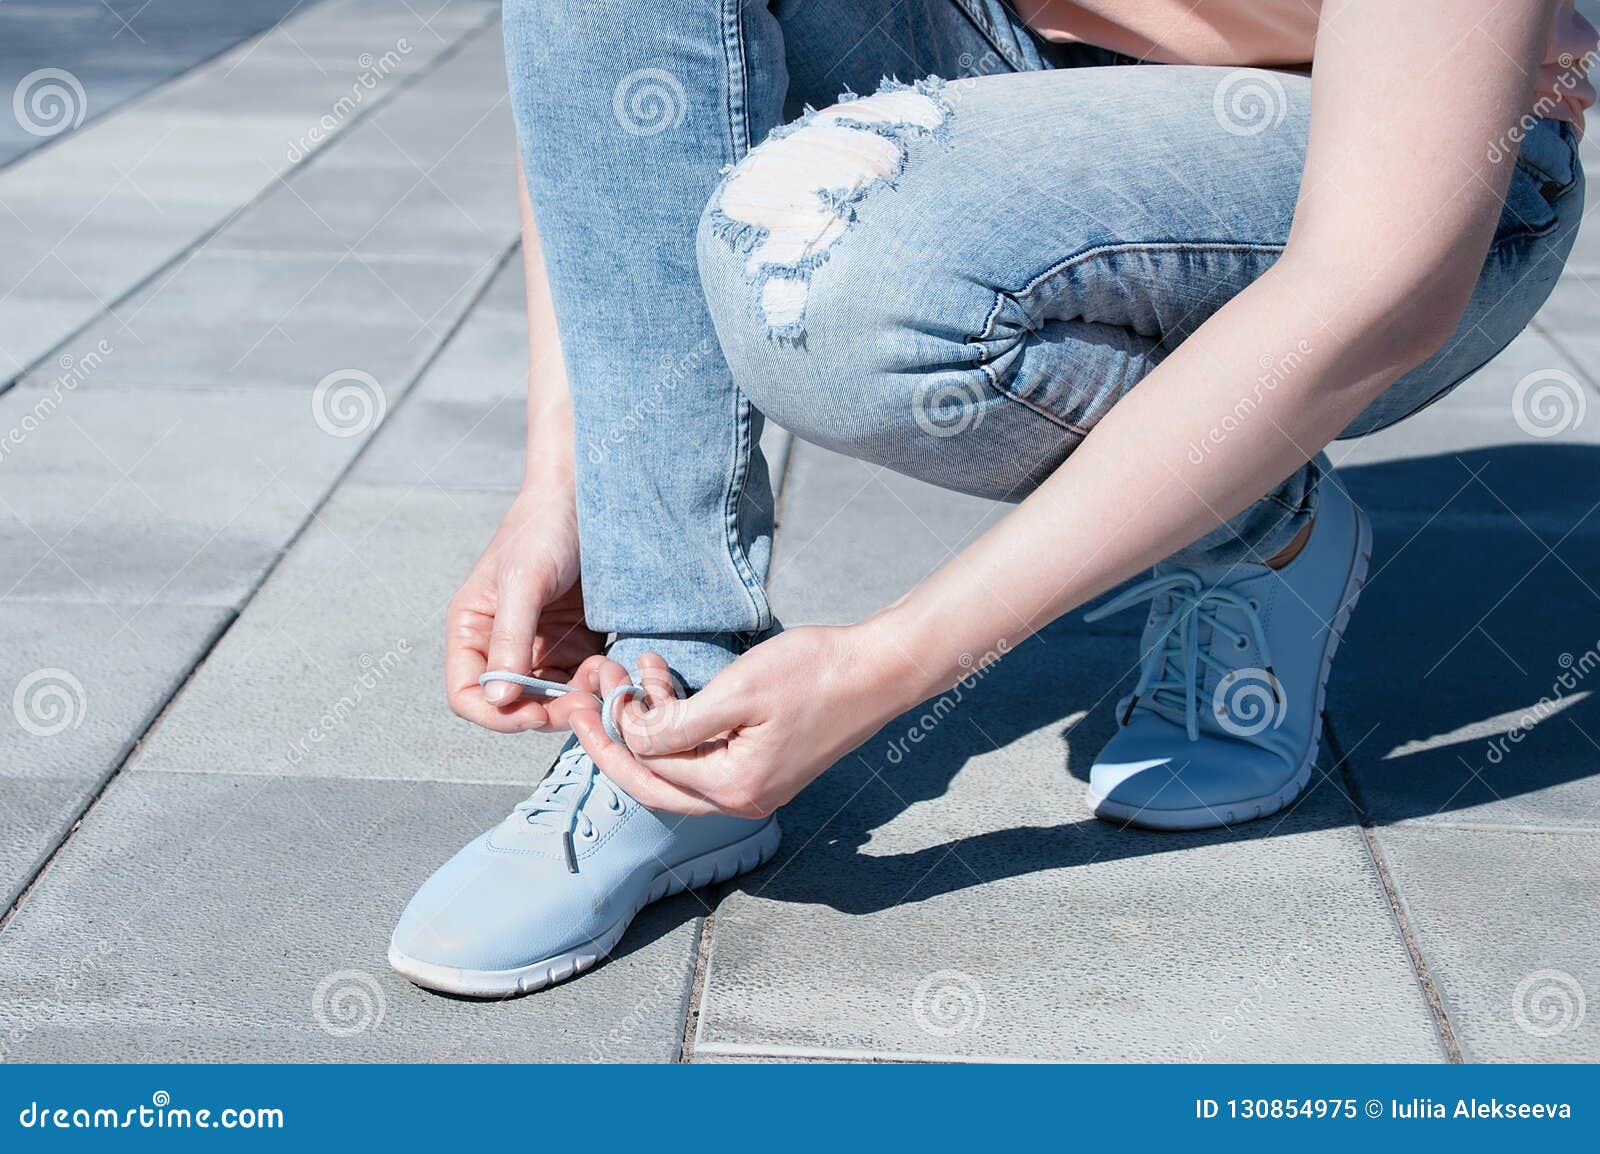 The Girl is Tying Shoelaces on Sneakers. Stock Image - Image of lace ...